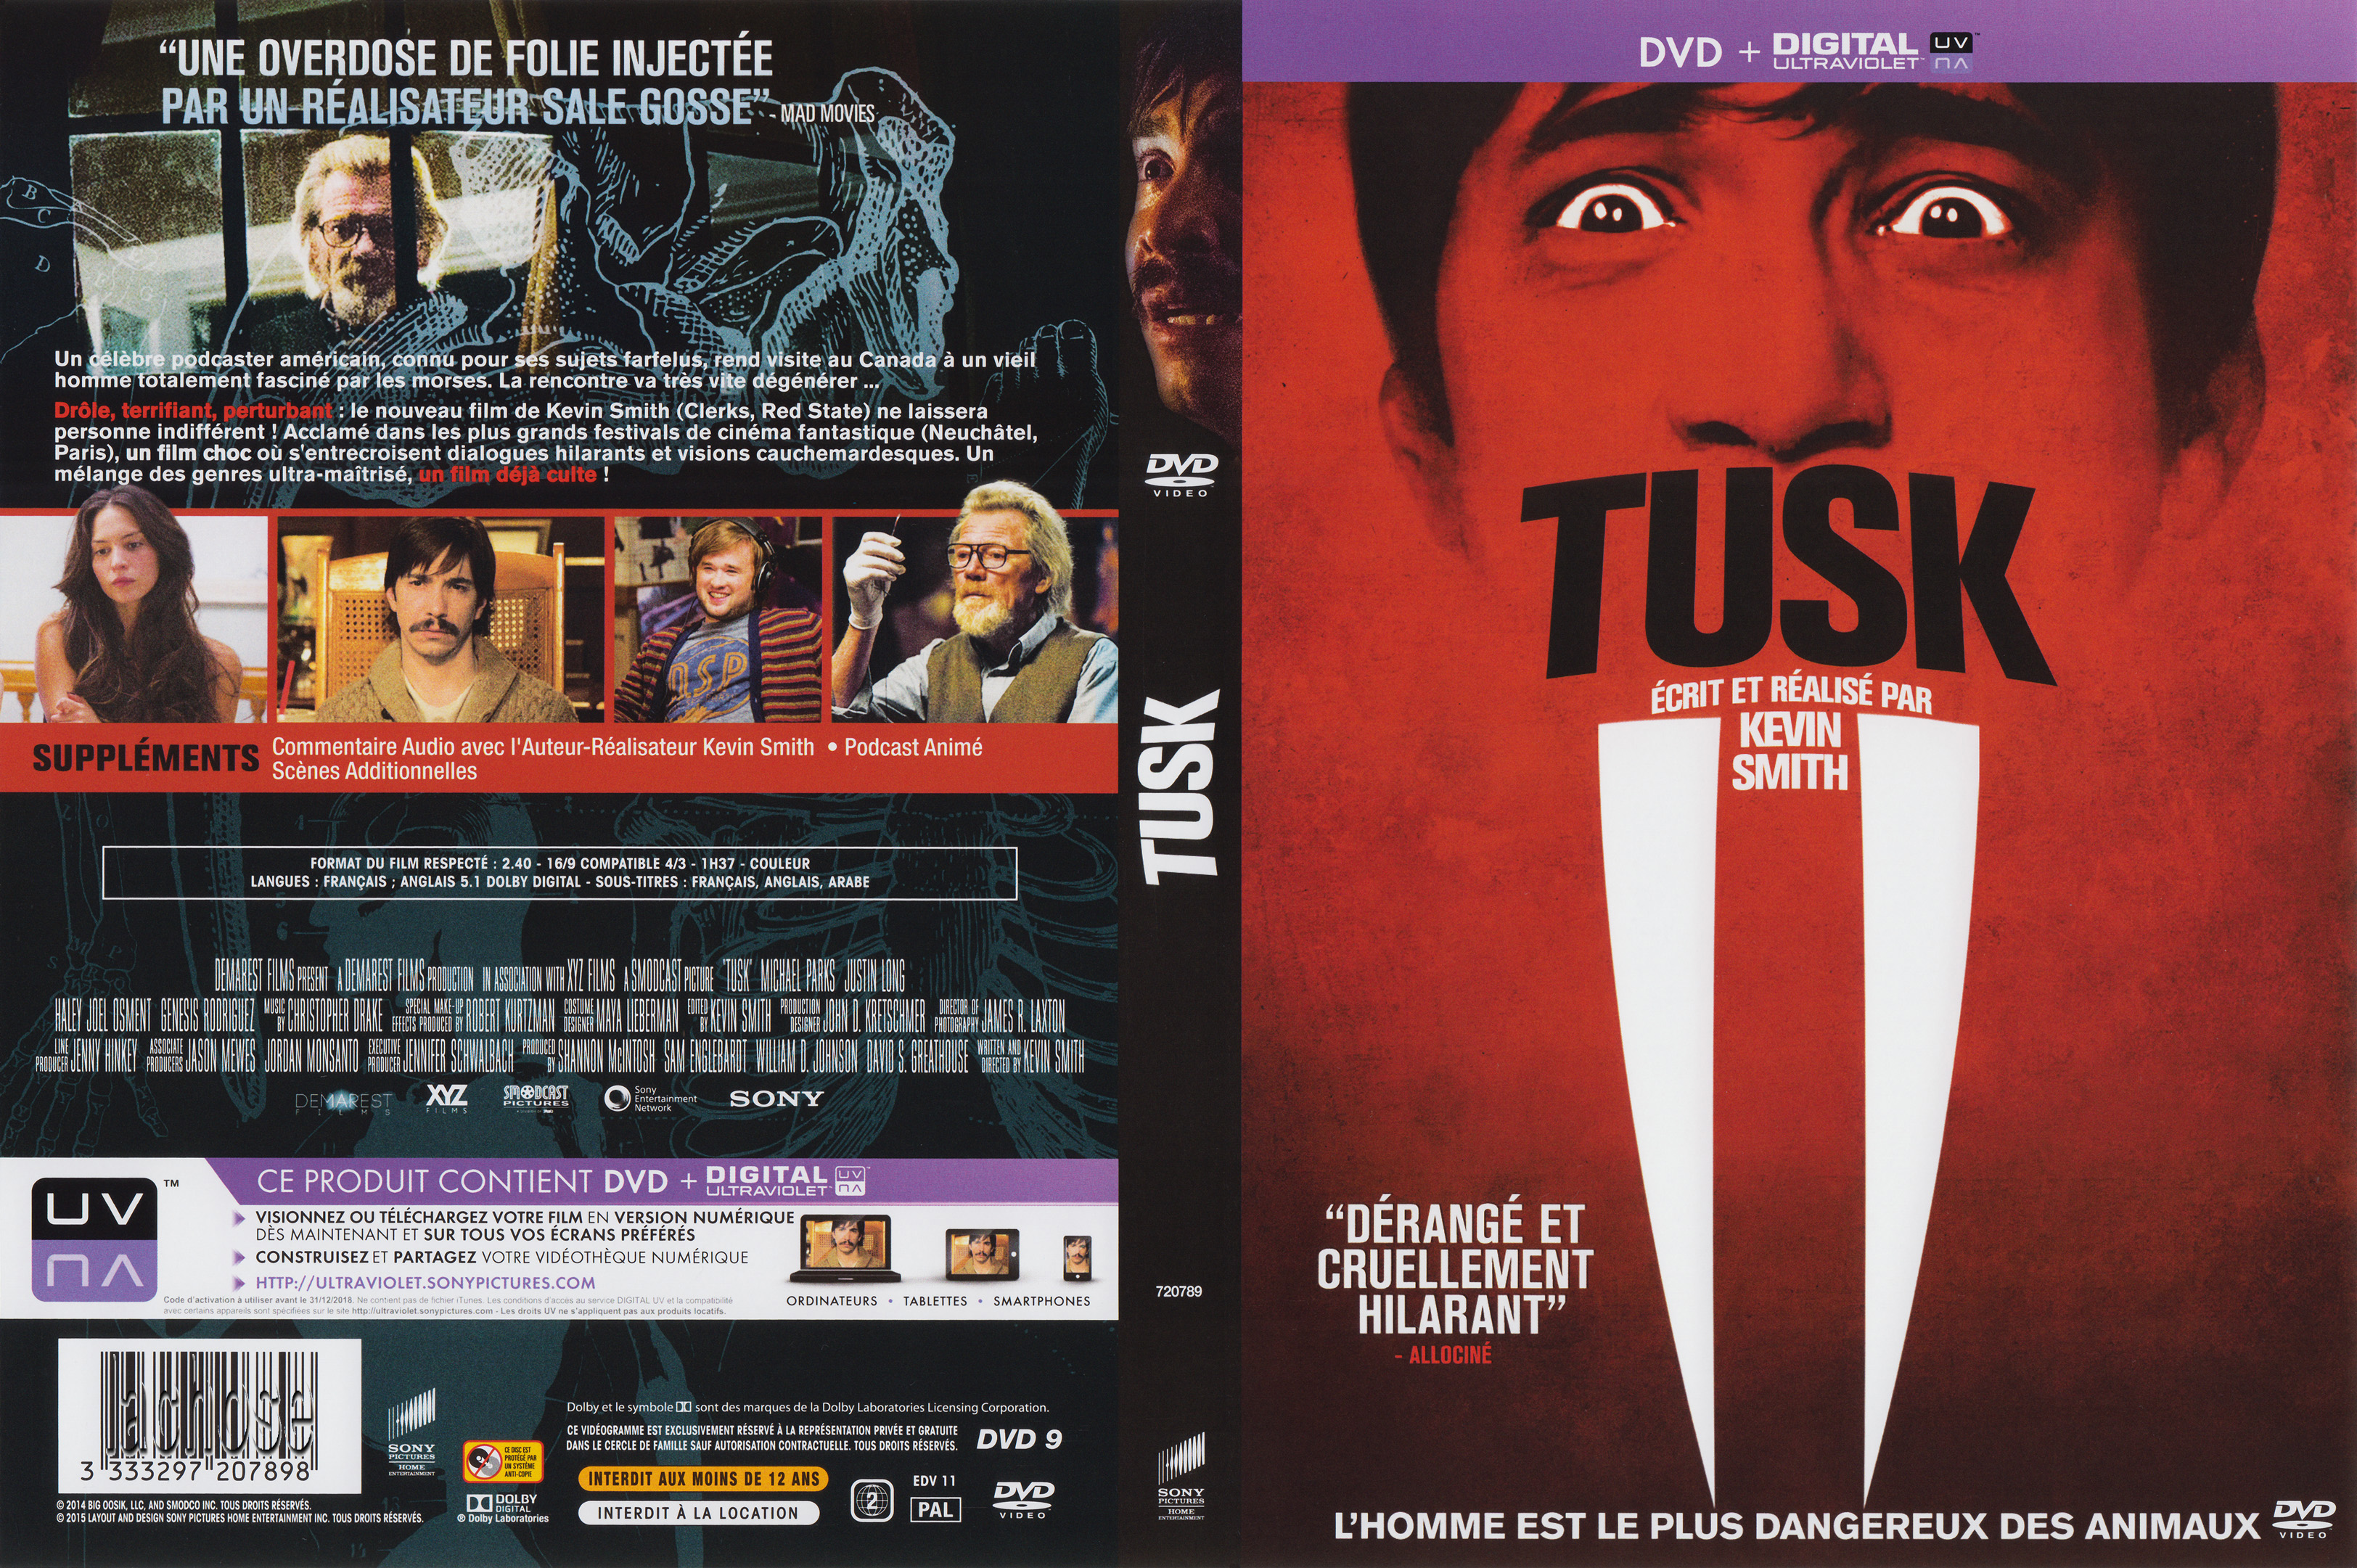 Jaquette DVD Tusk